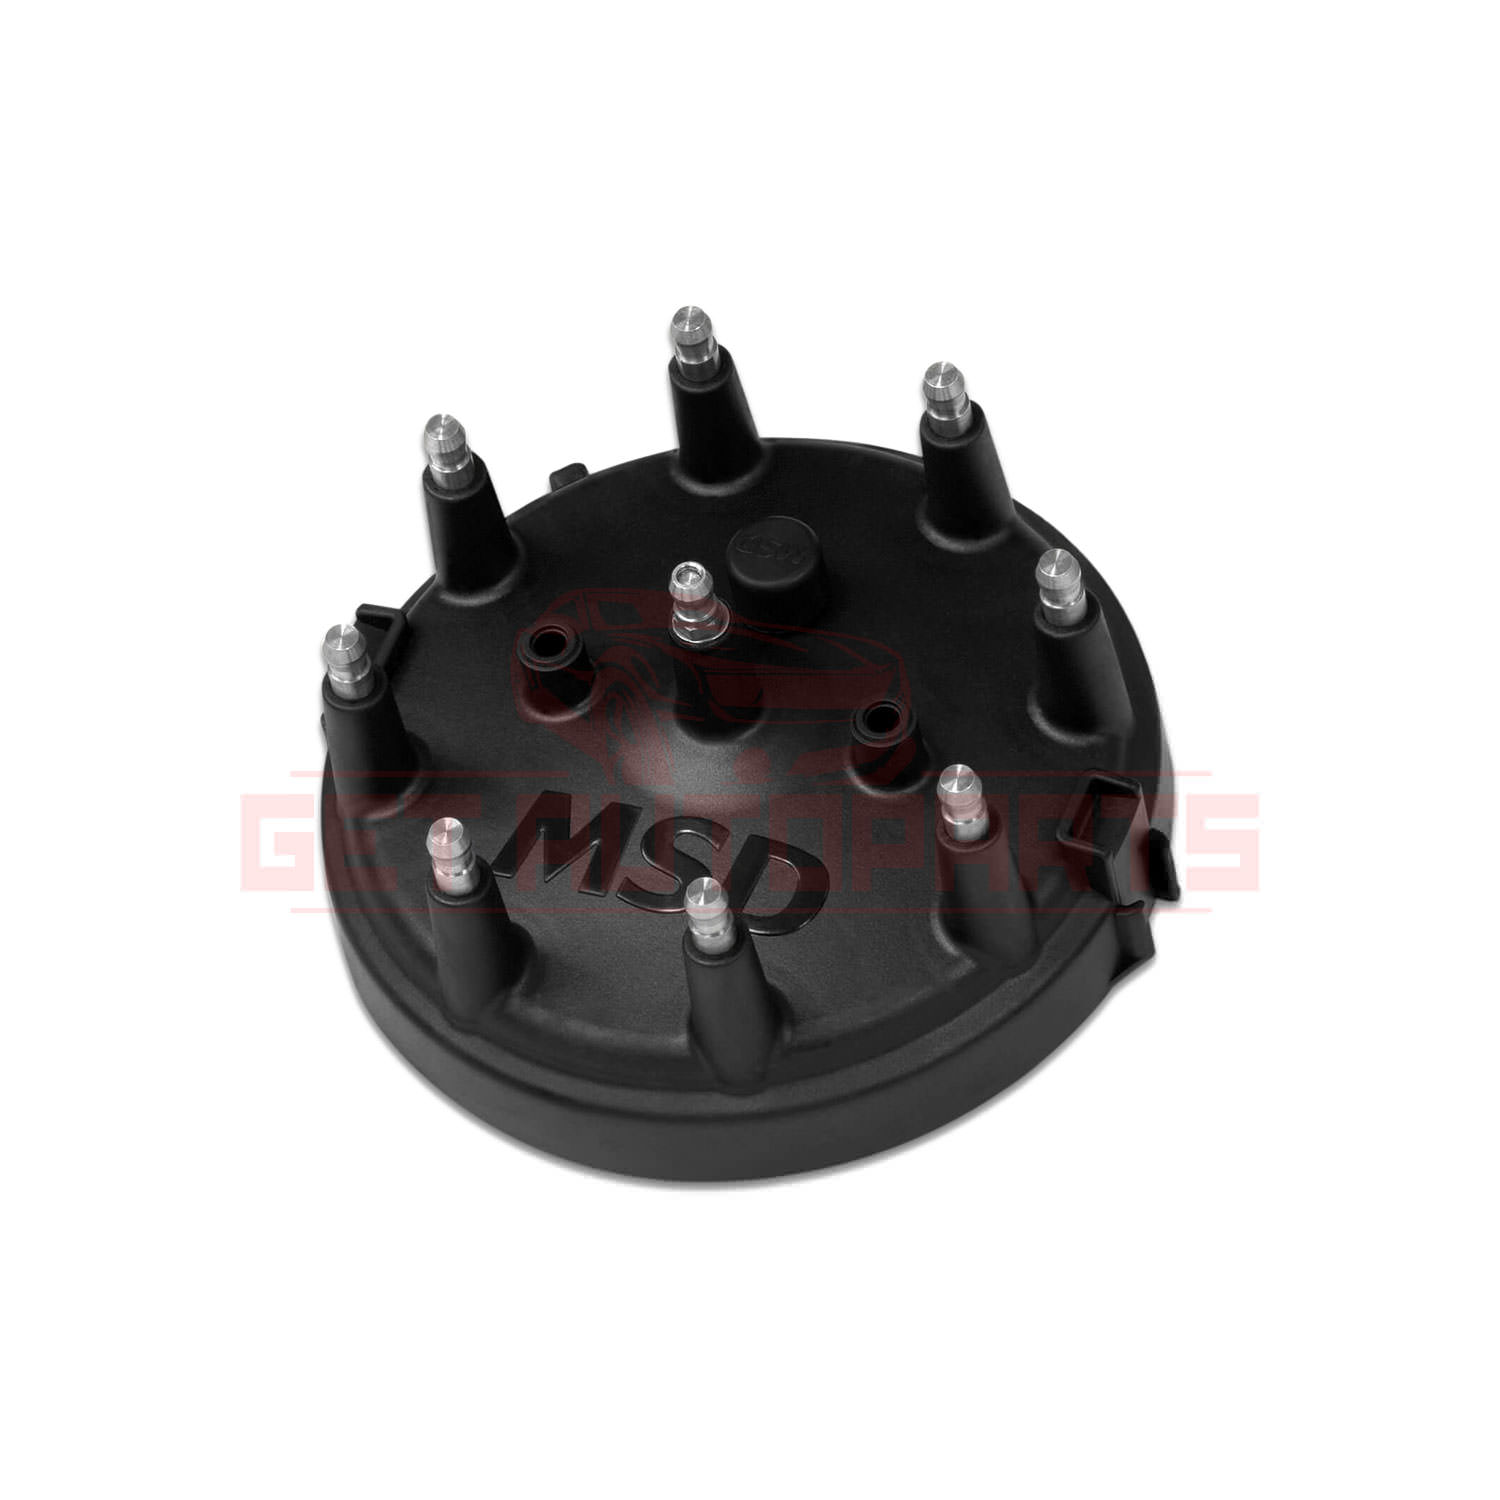 MSD Distributor Cap fits Ford Mustang 79-1995